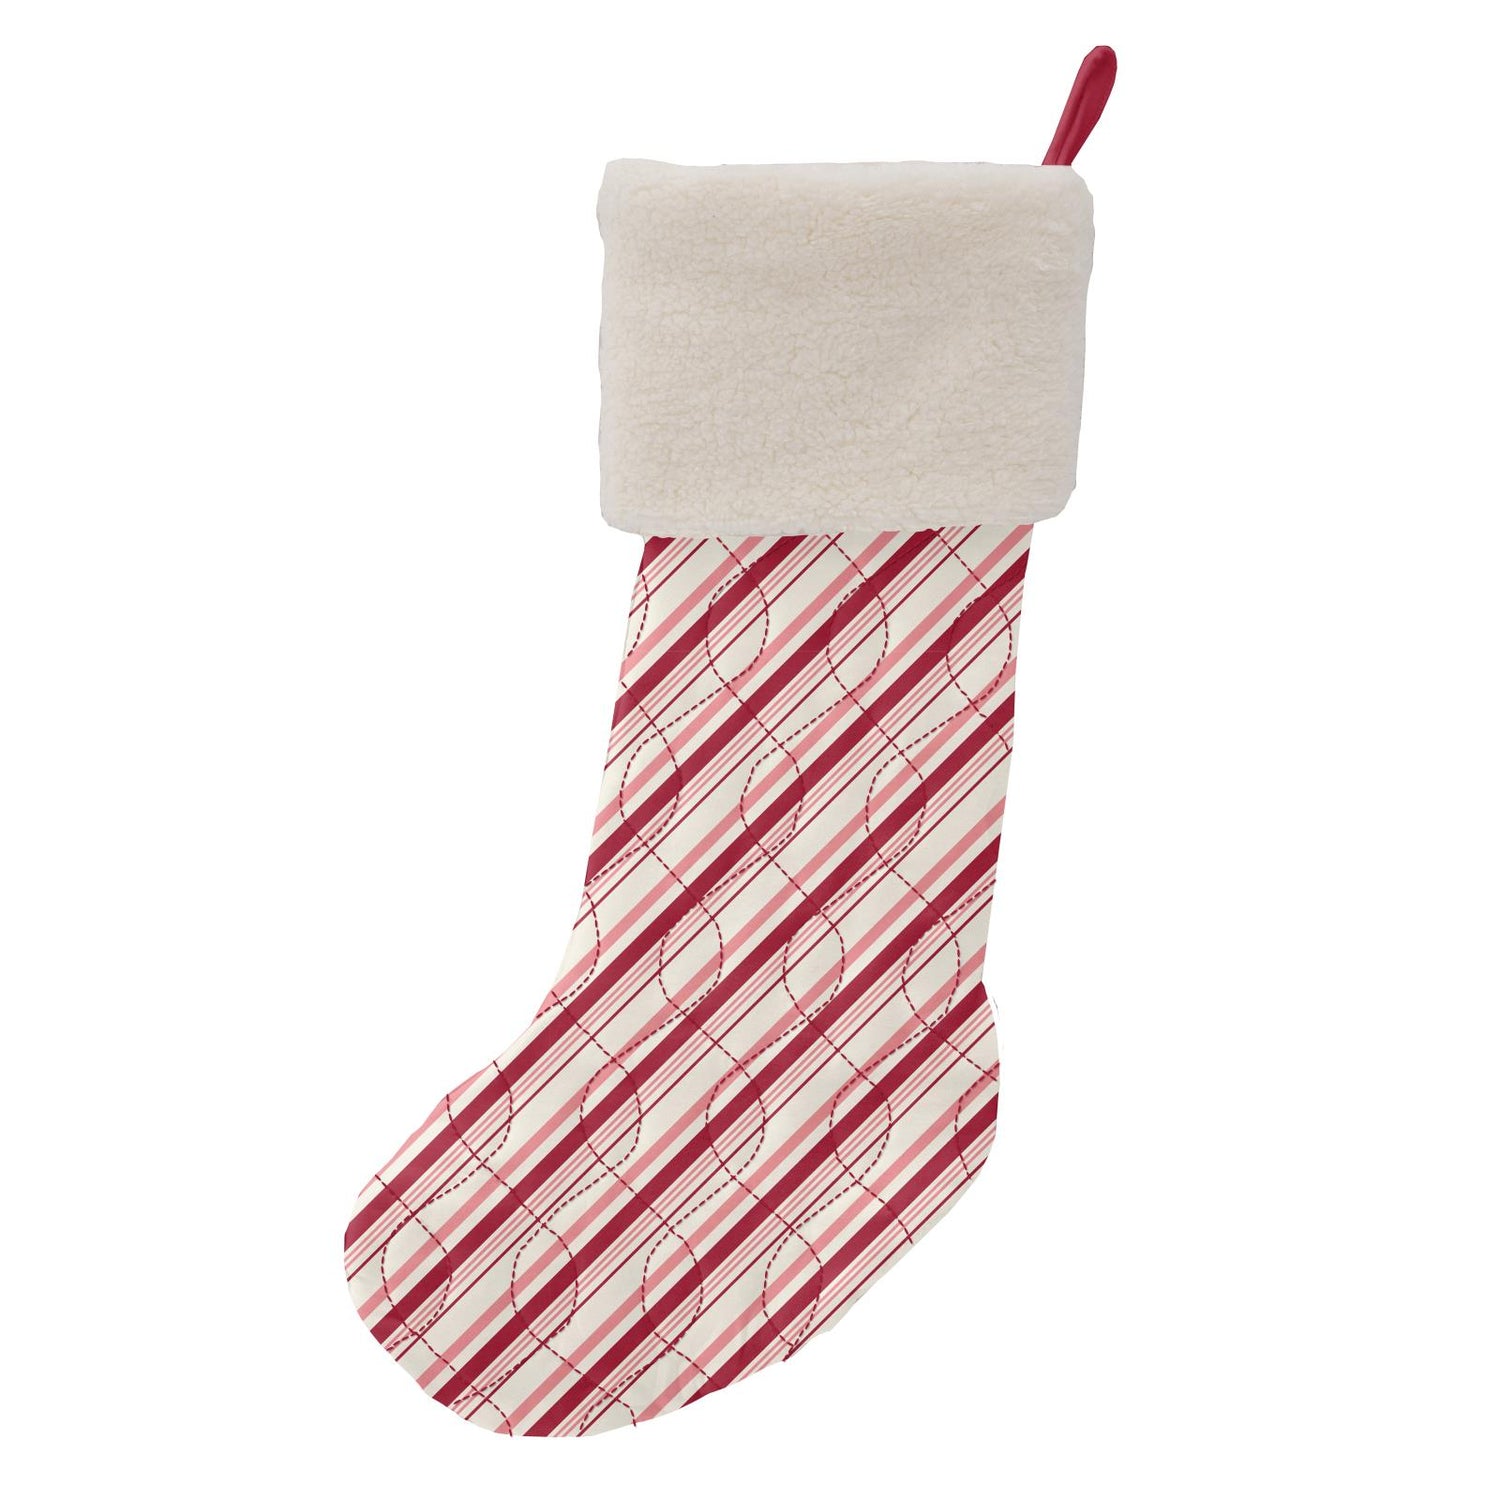 Quilted Stocking in Strawberry Candy Cane Stripe/Christmas Floral